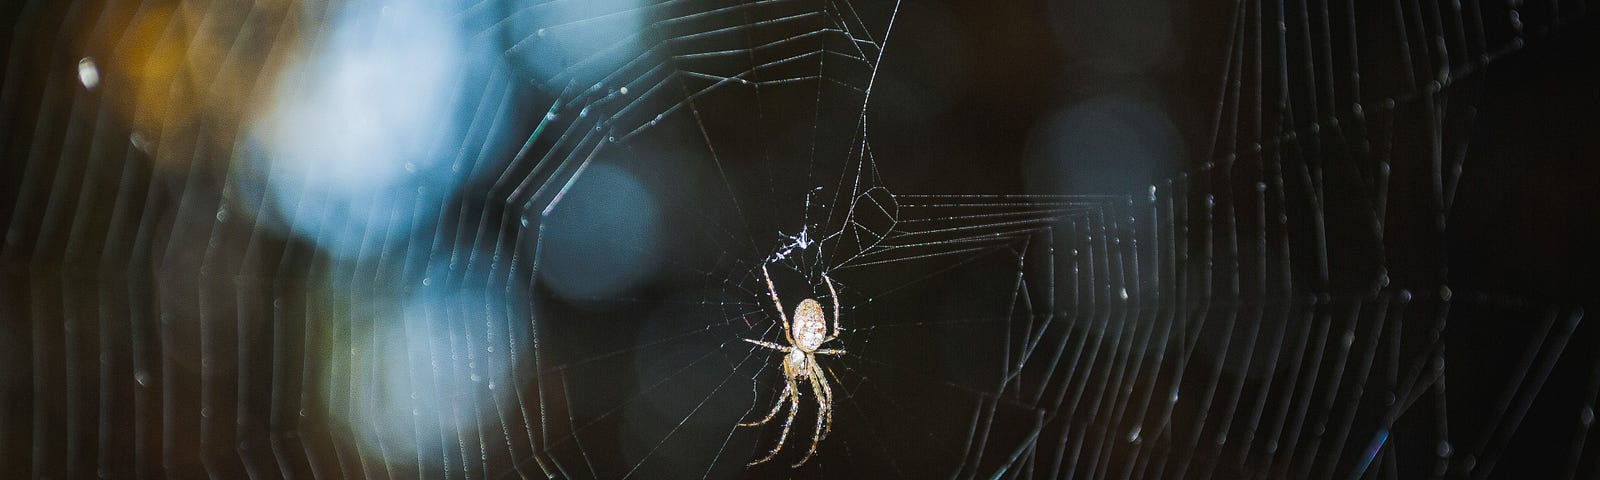 Silver-colored spider at the center of its web, with a dark, blurred out background